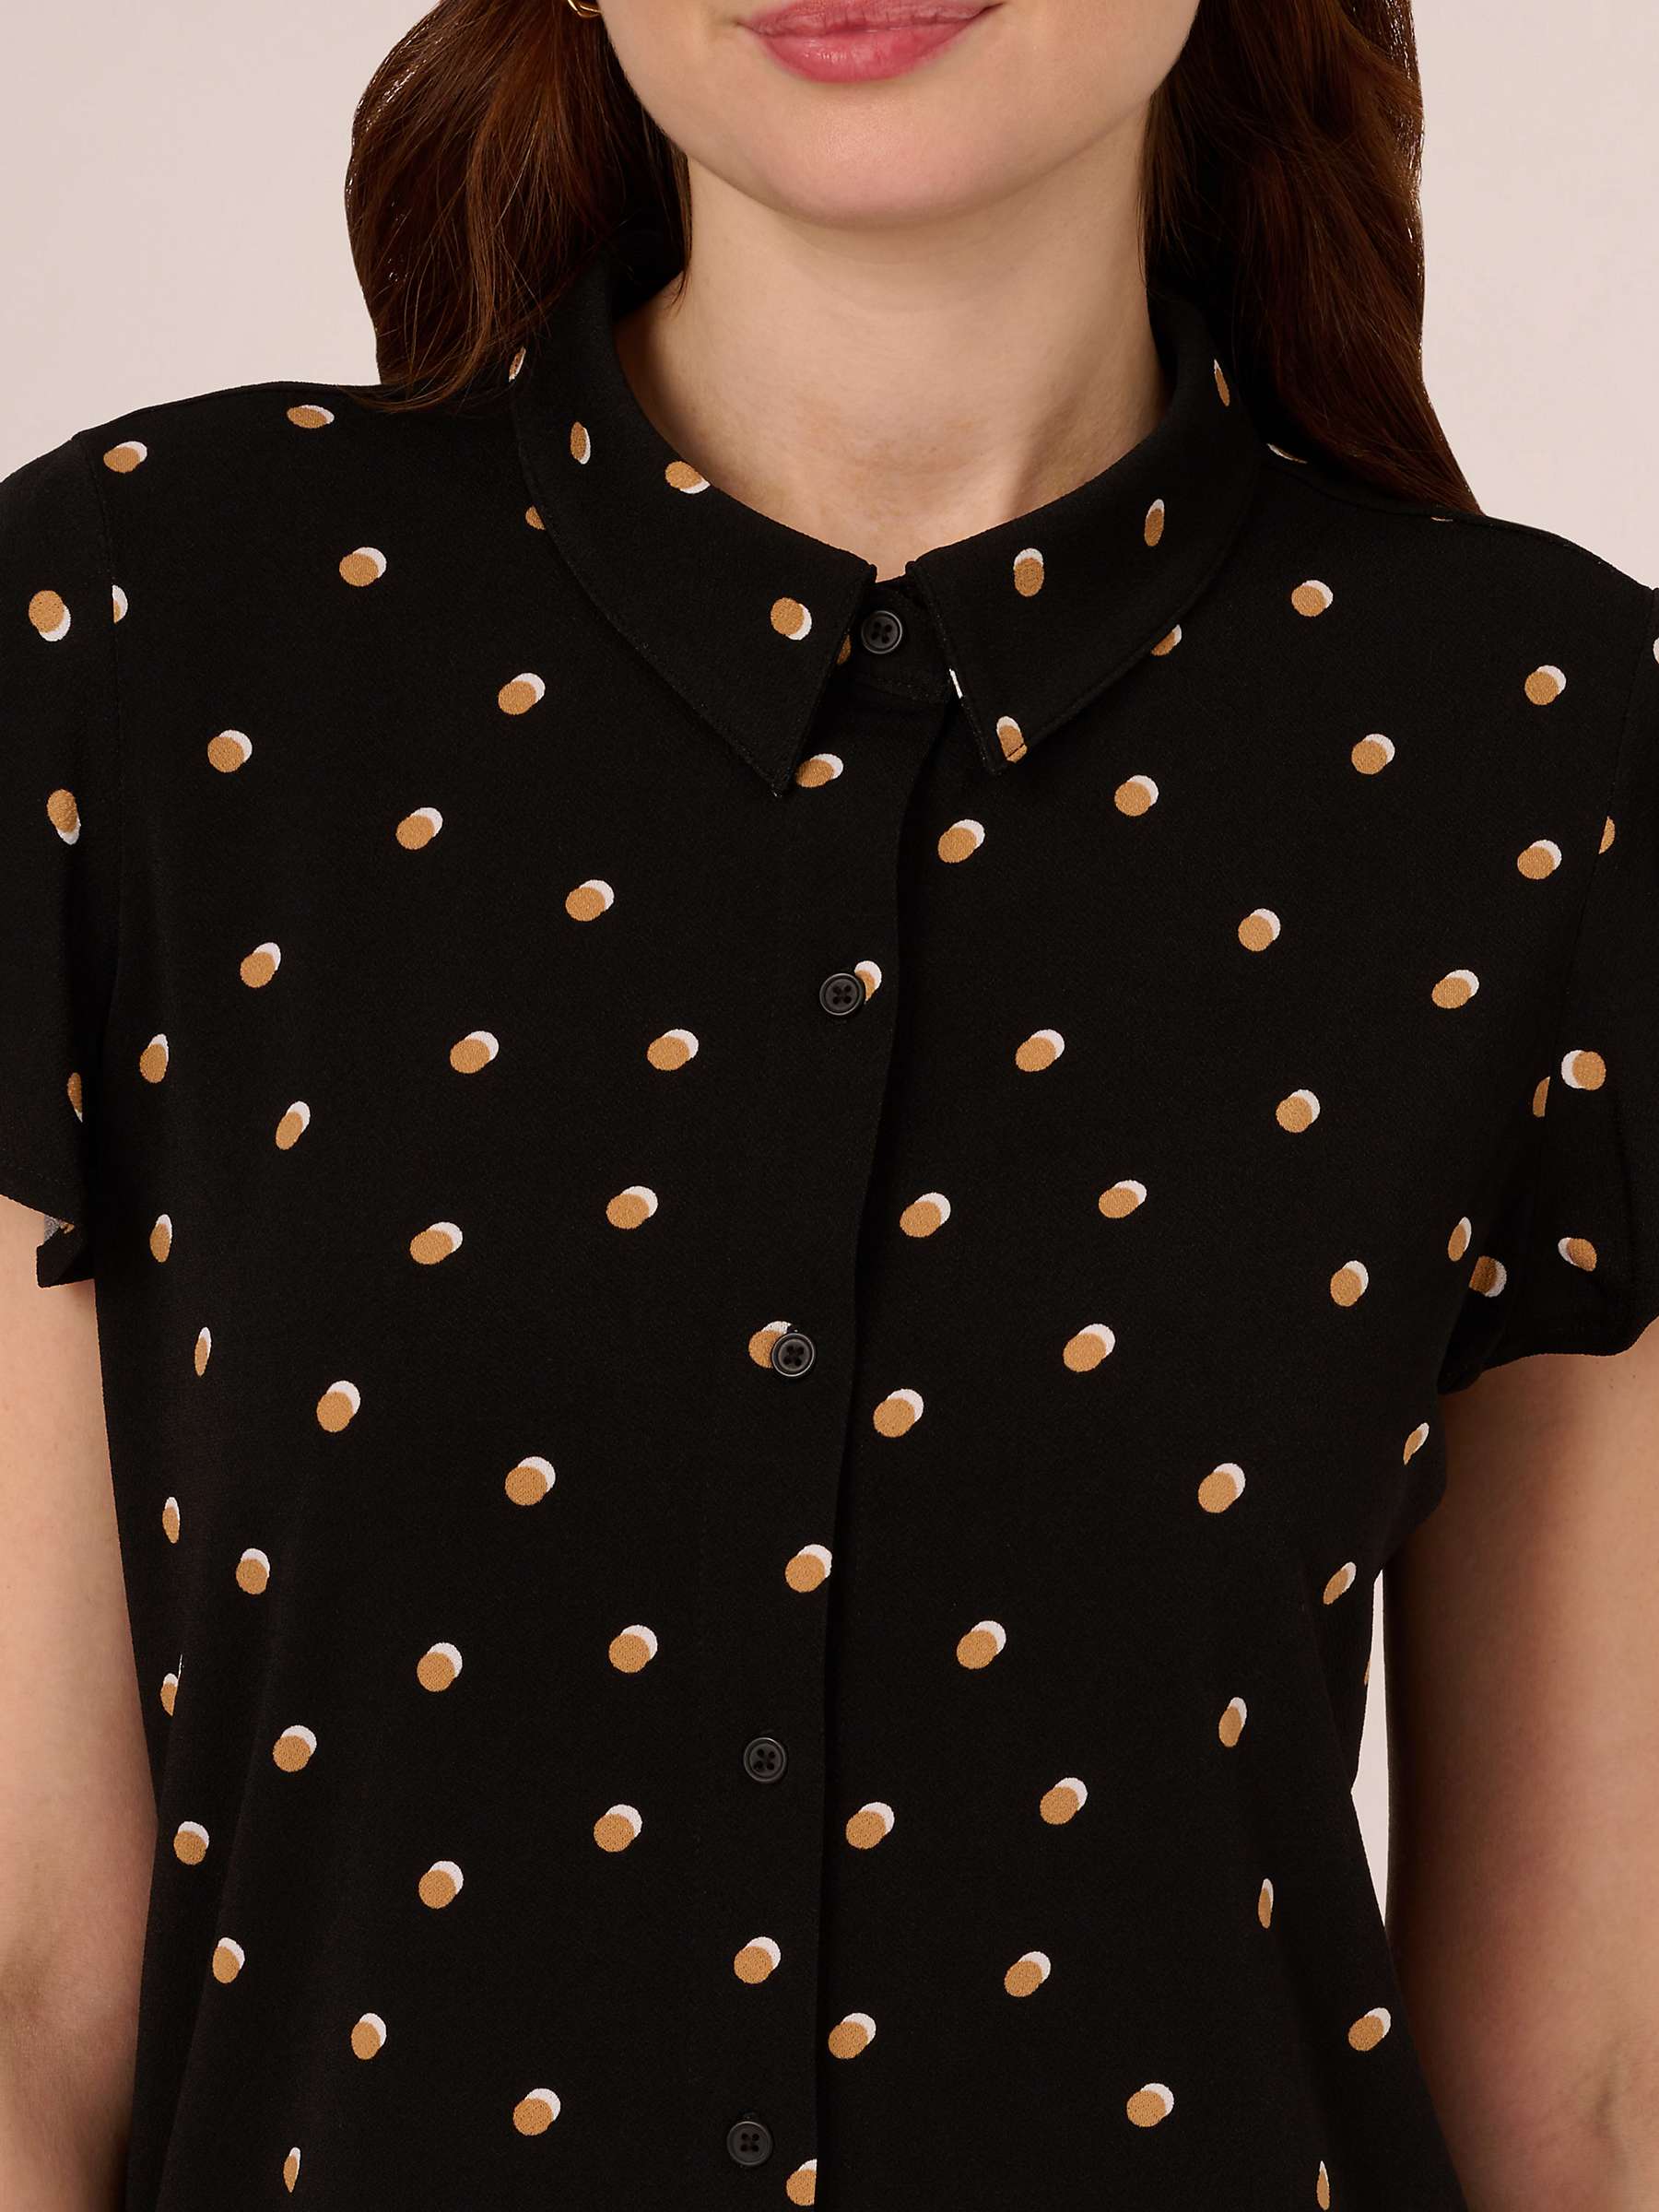 Buy Adrianna Papell Flutter Sleeve Button Up Top, Black/Khaki Online at johnlewis.com